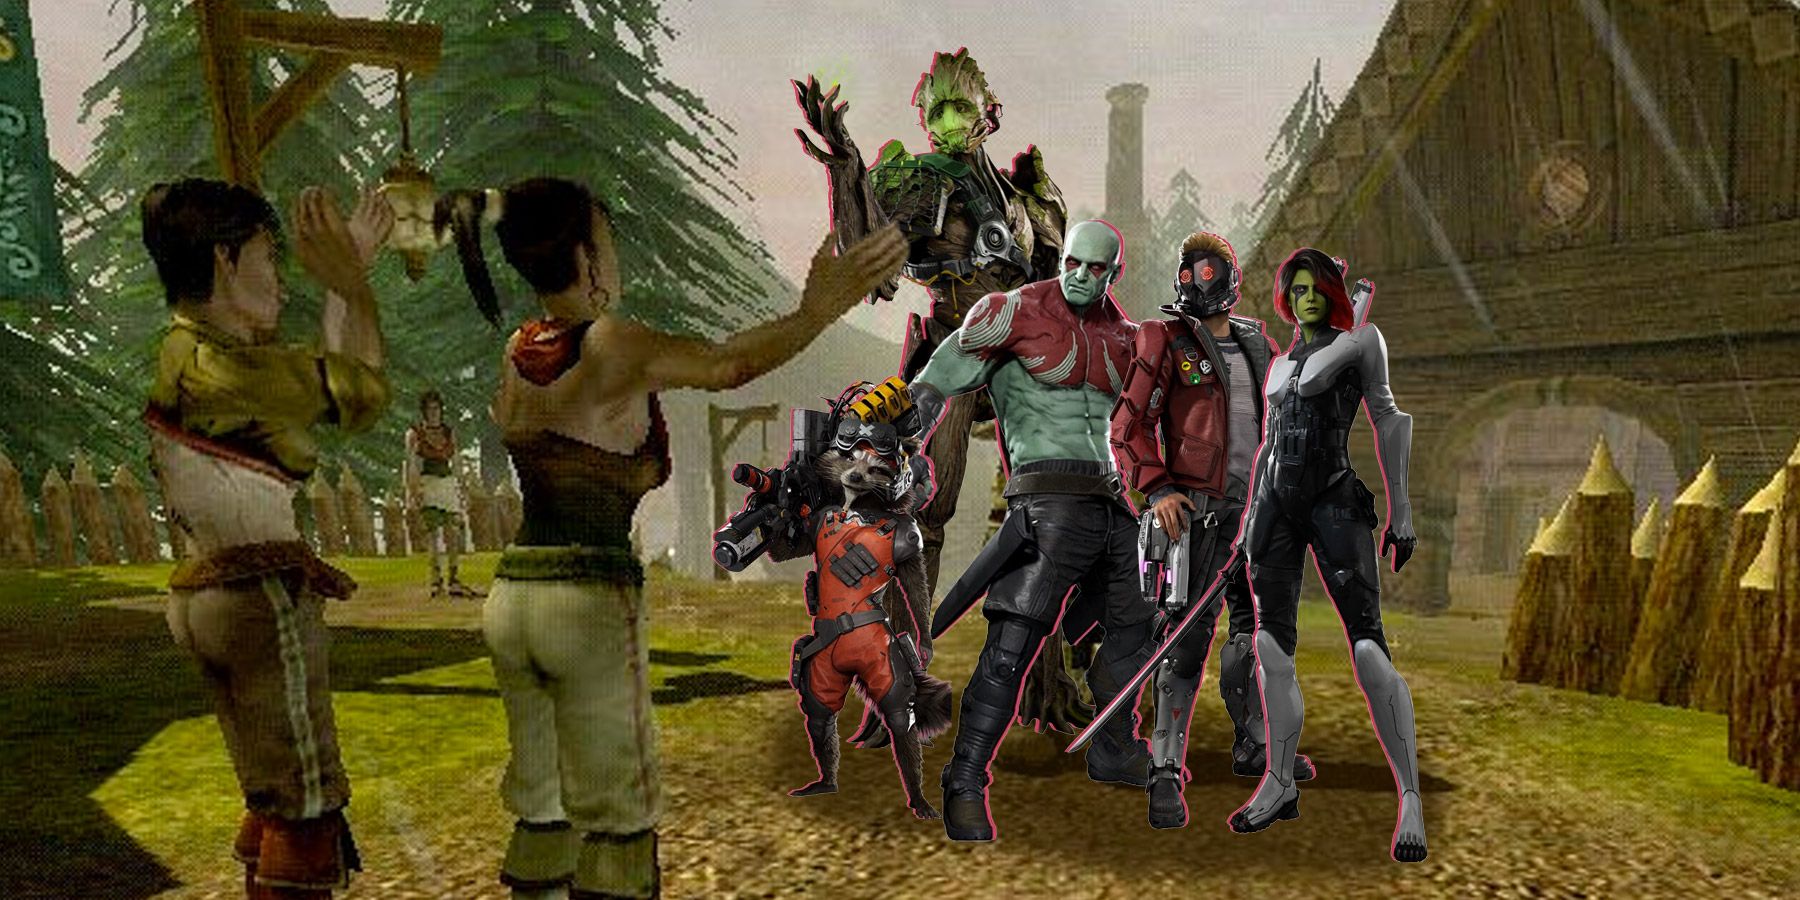 Fable Reboot Borrow Guardians Of The Galaxy